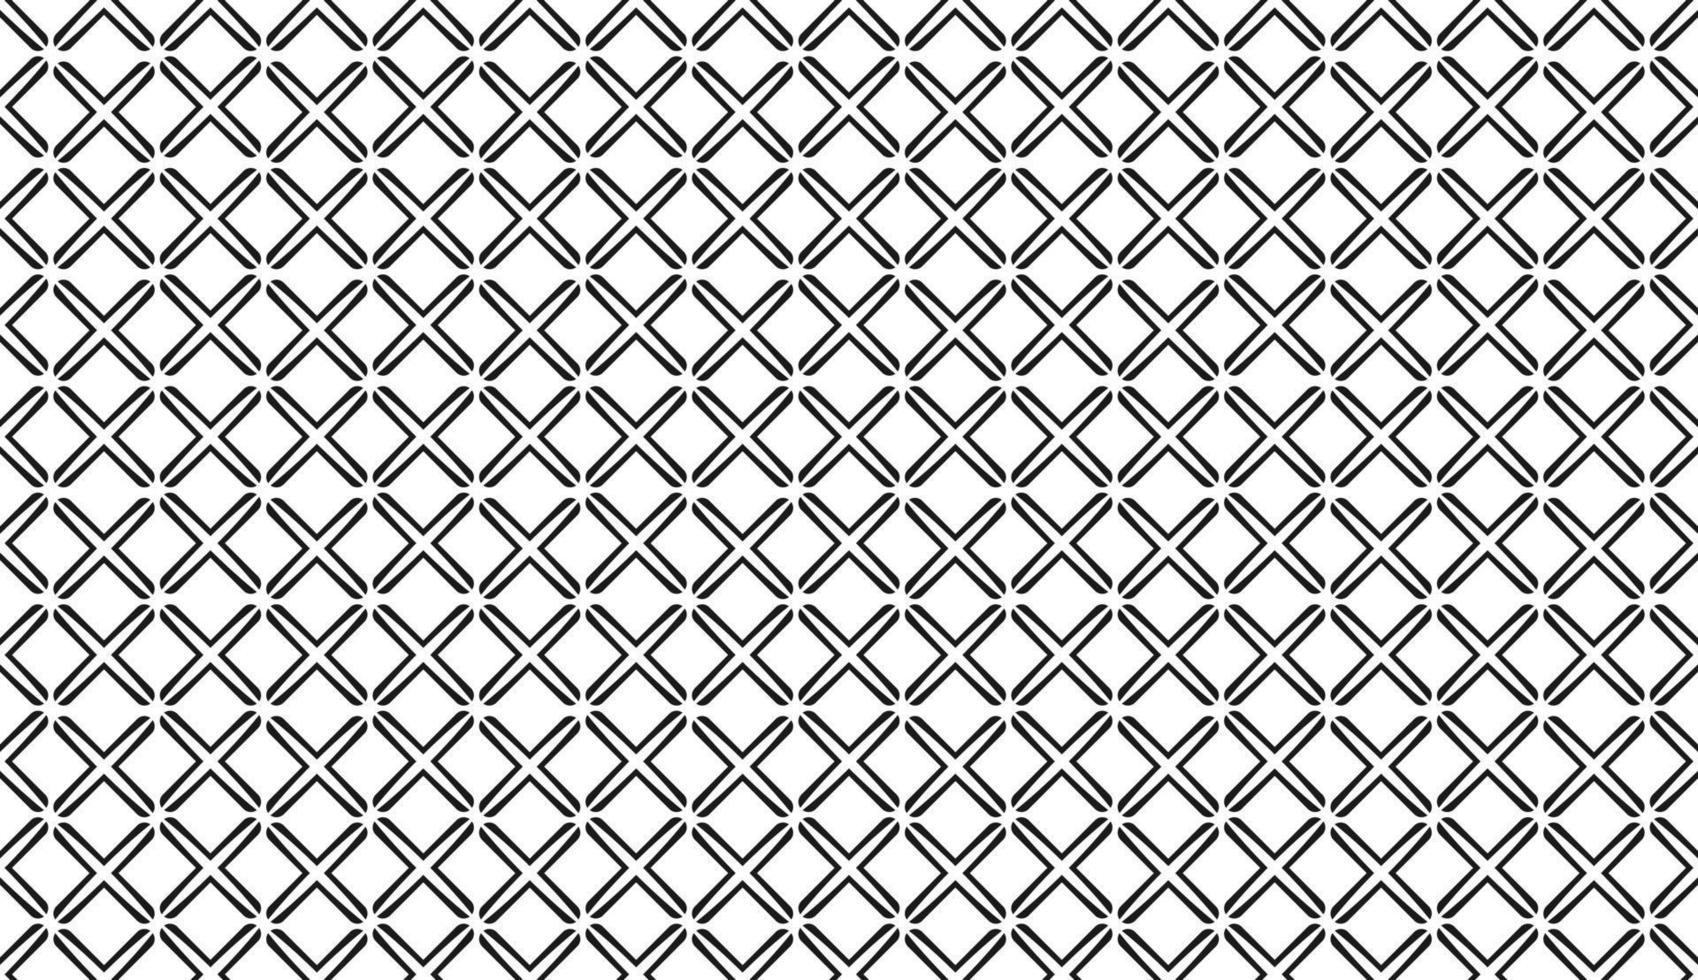 Seamless pattern. Black and white cross pattern. Simple pattern design. Can be used for posters, brochures, postcards, and other printing needs. Vector illustration